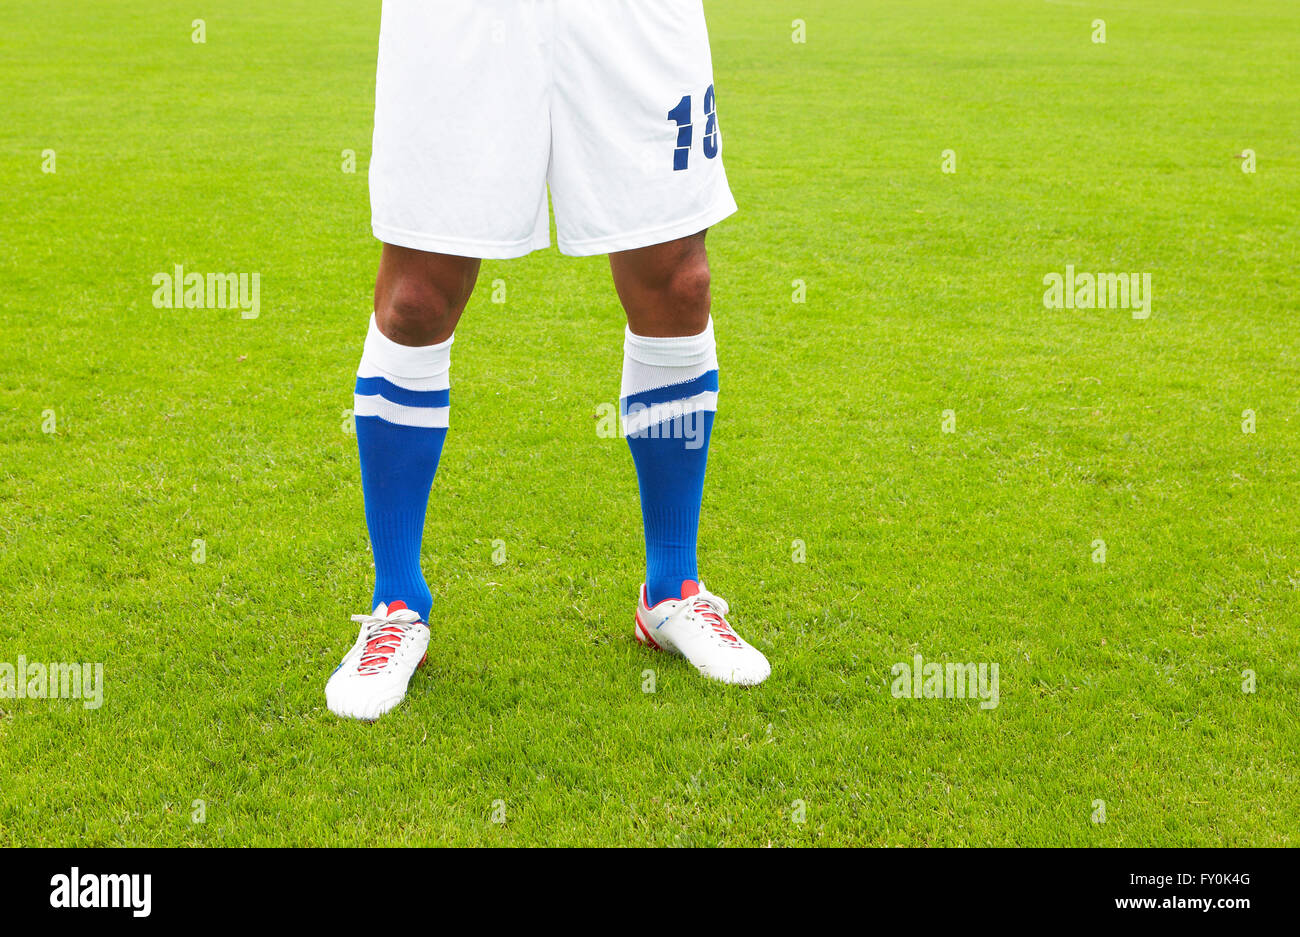 Football player dressed in white and blue in the ground Stock Photo